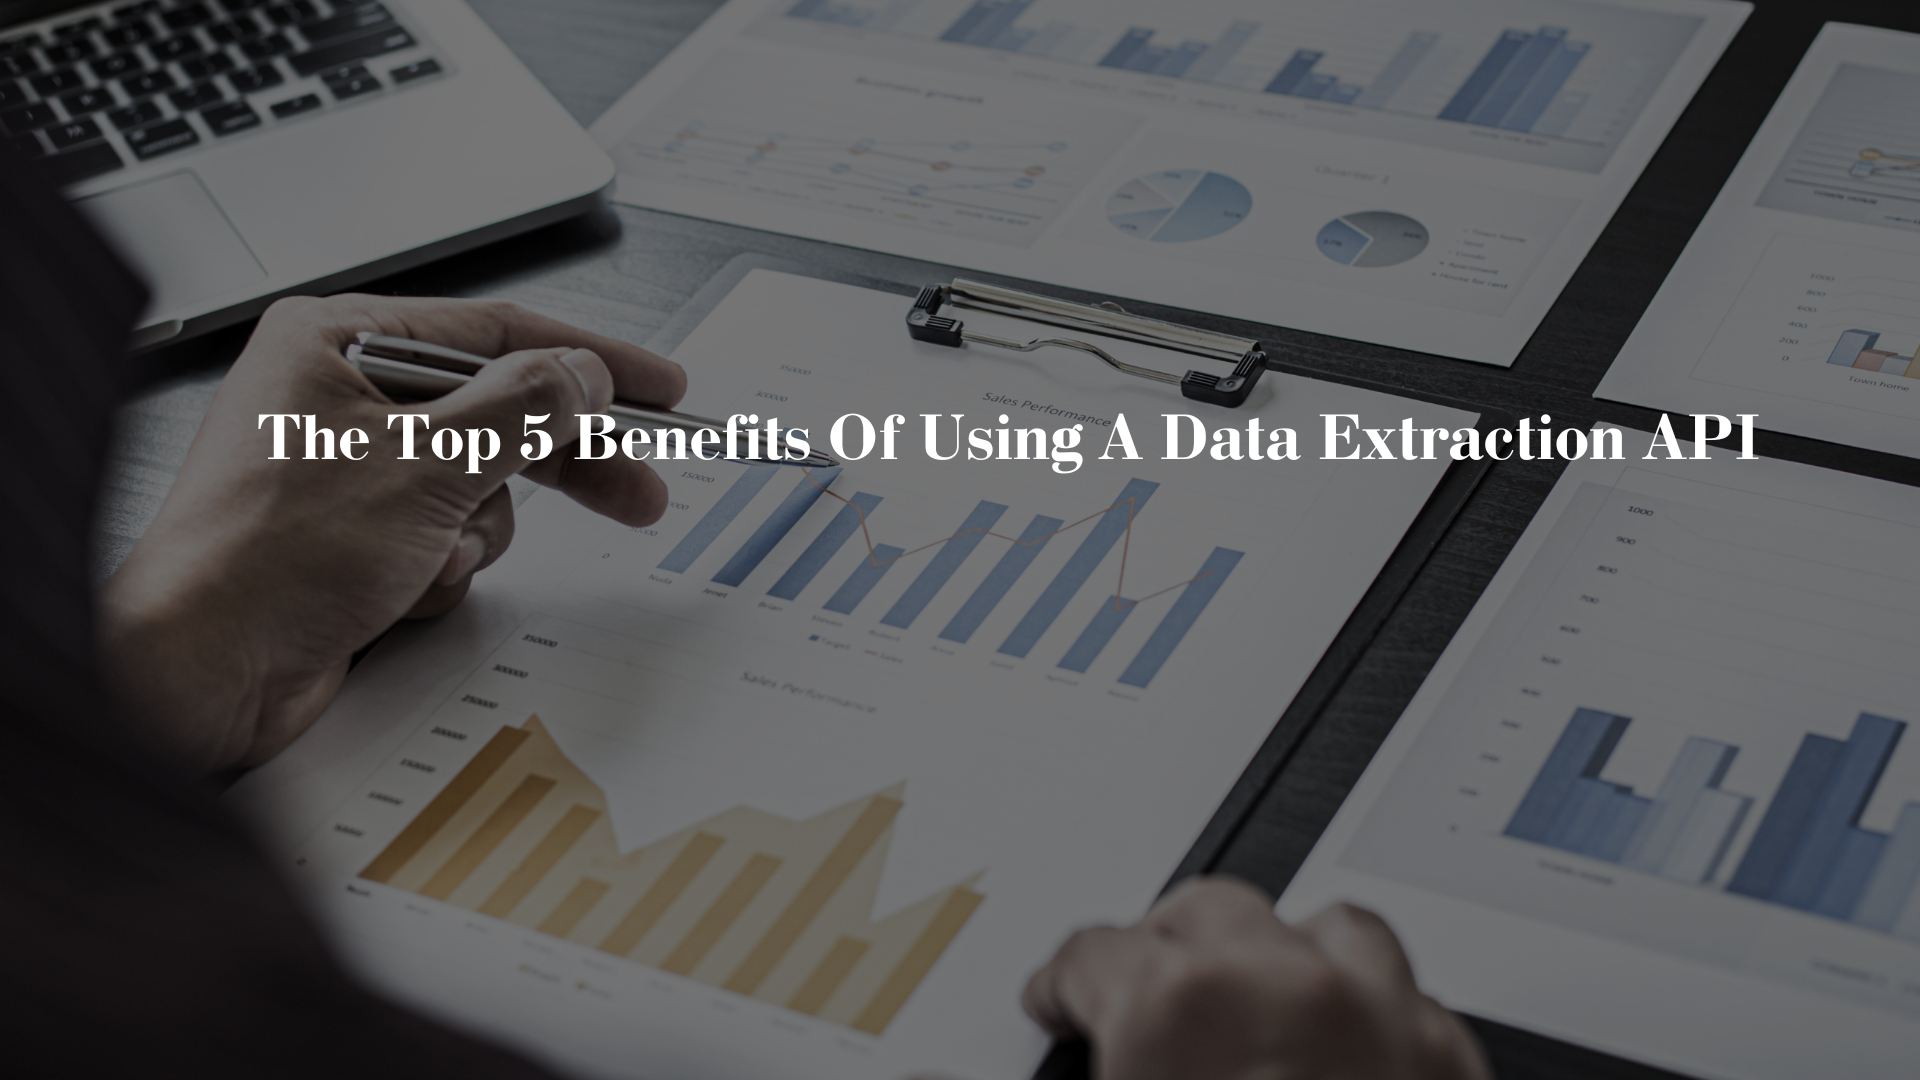 The Top 5 Benefits Of Using A Data Extraction API